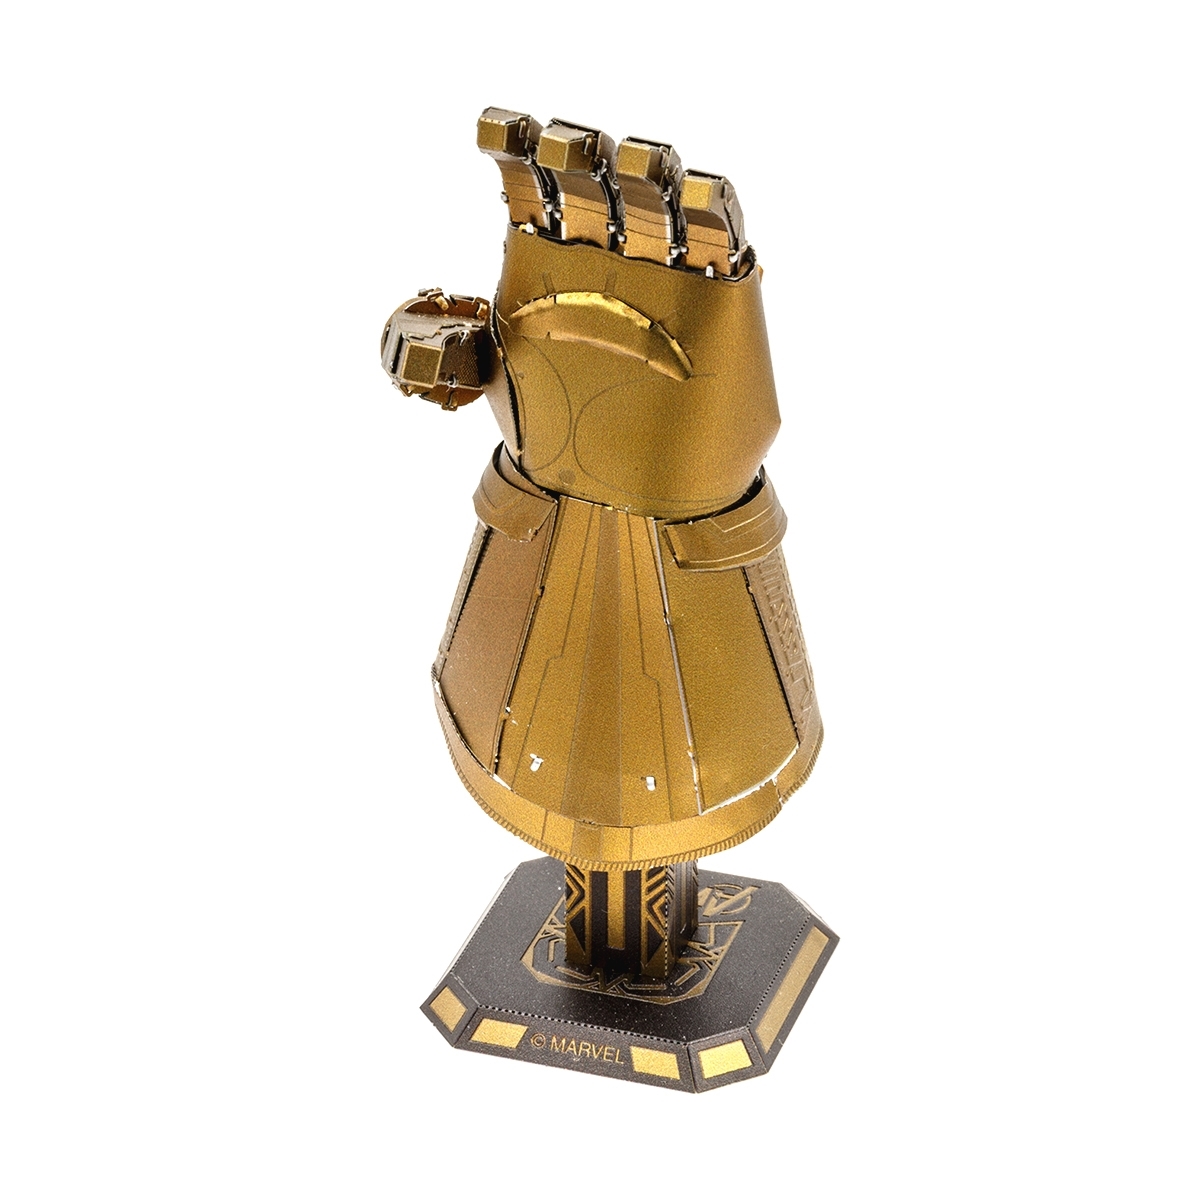 Fascinations Infinity Gauntlet Thanos Marvel Metal Earth 3DModel New 2020 MMS328 